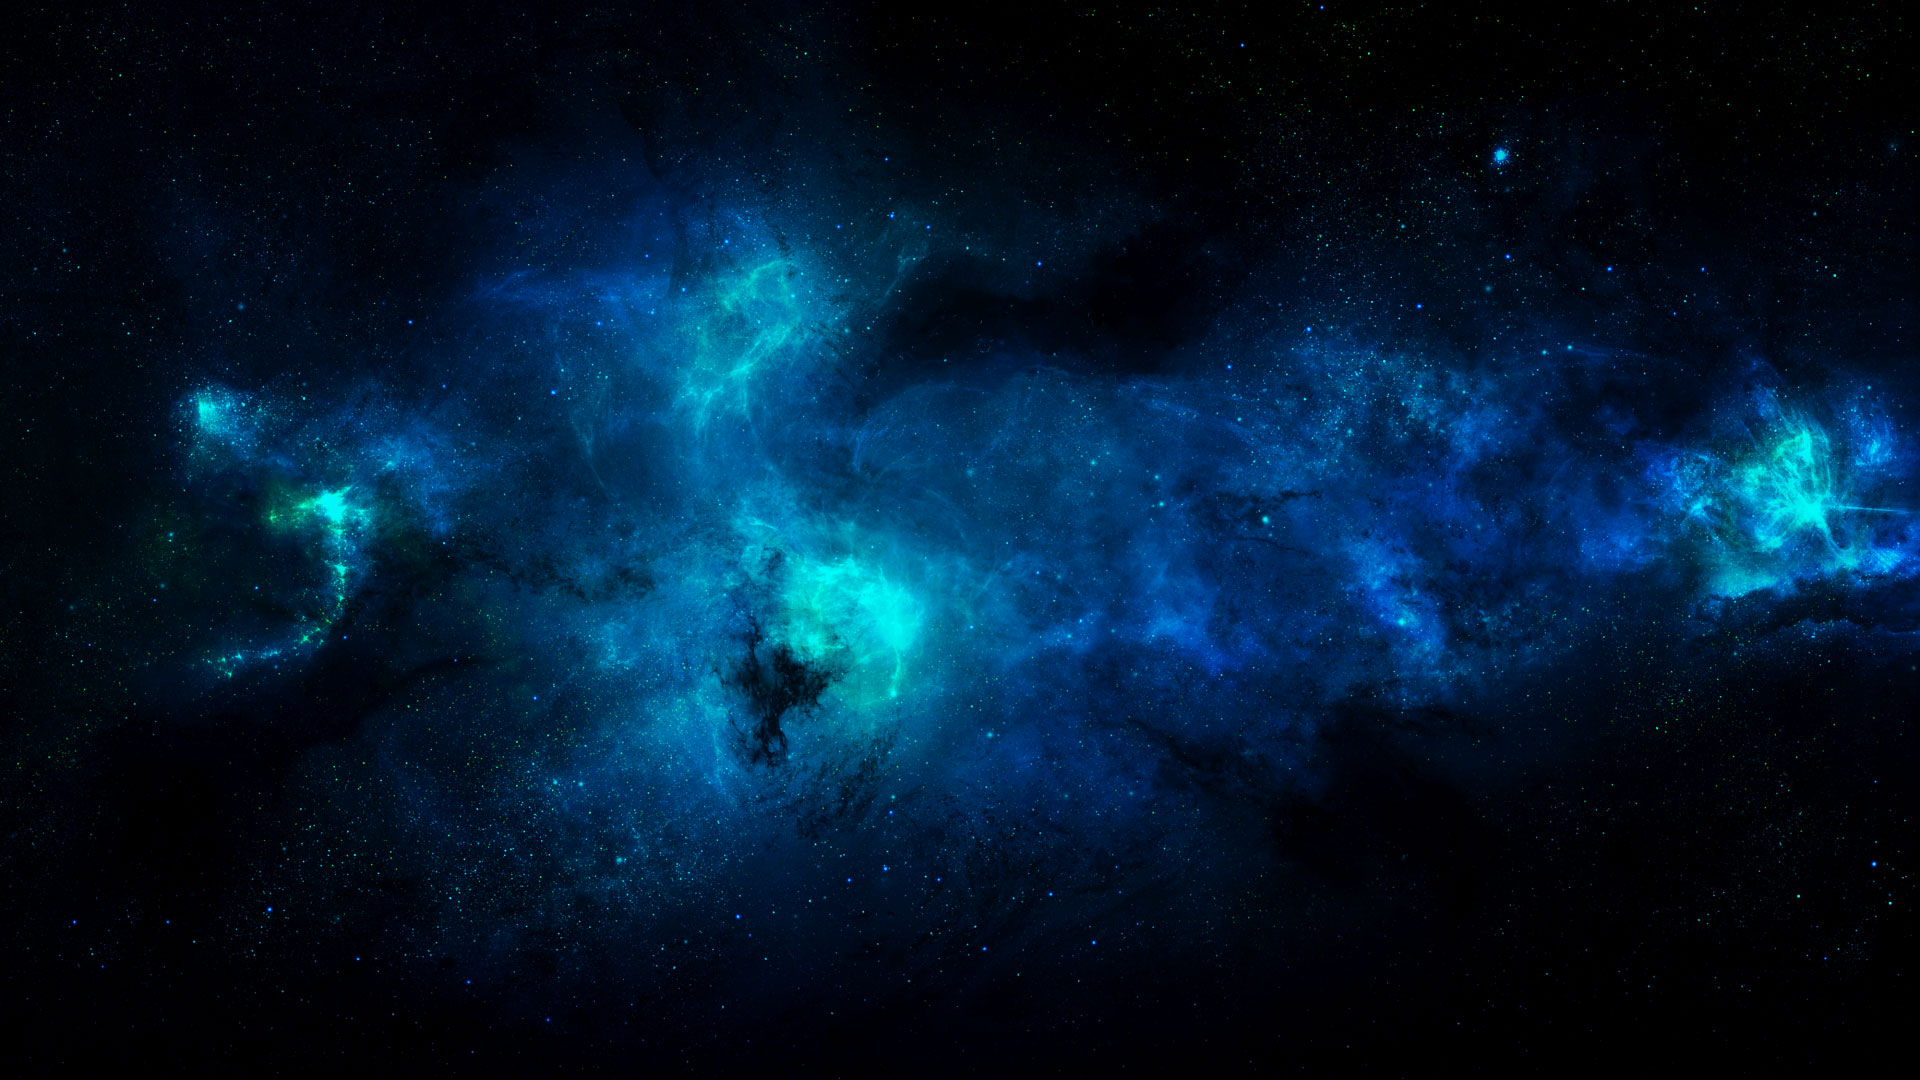 Some Space Wallpaper